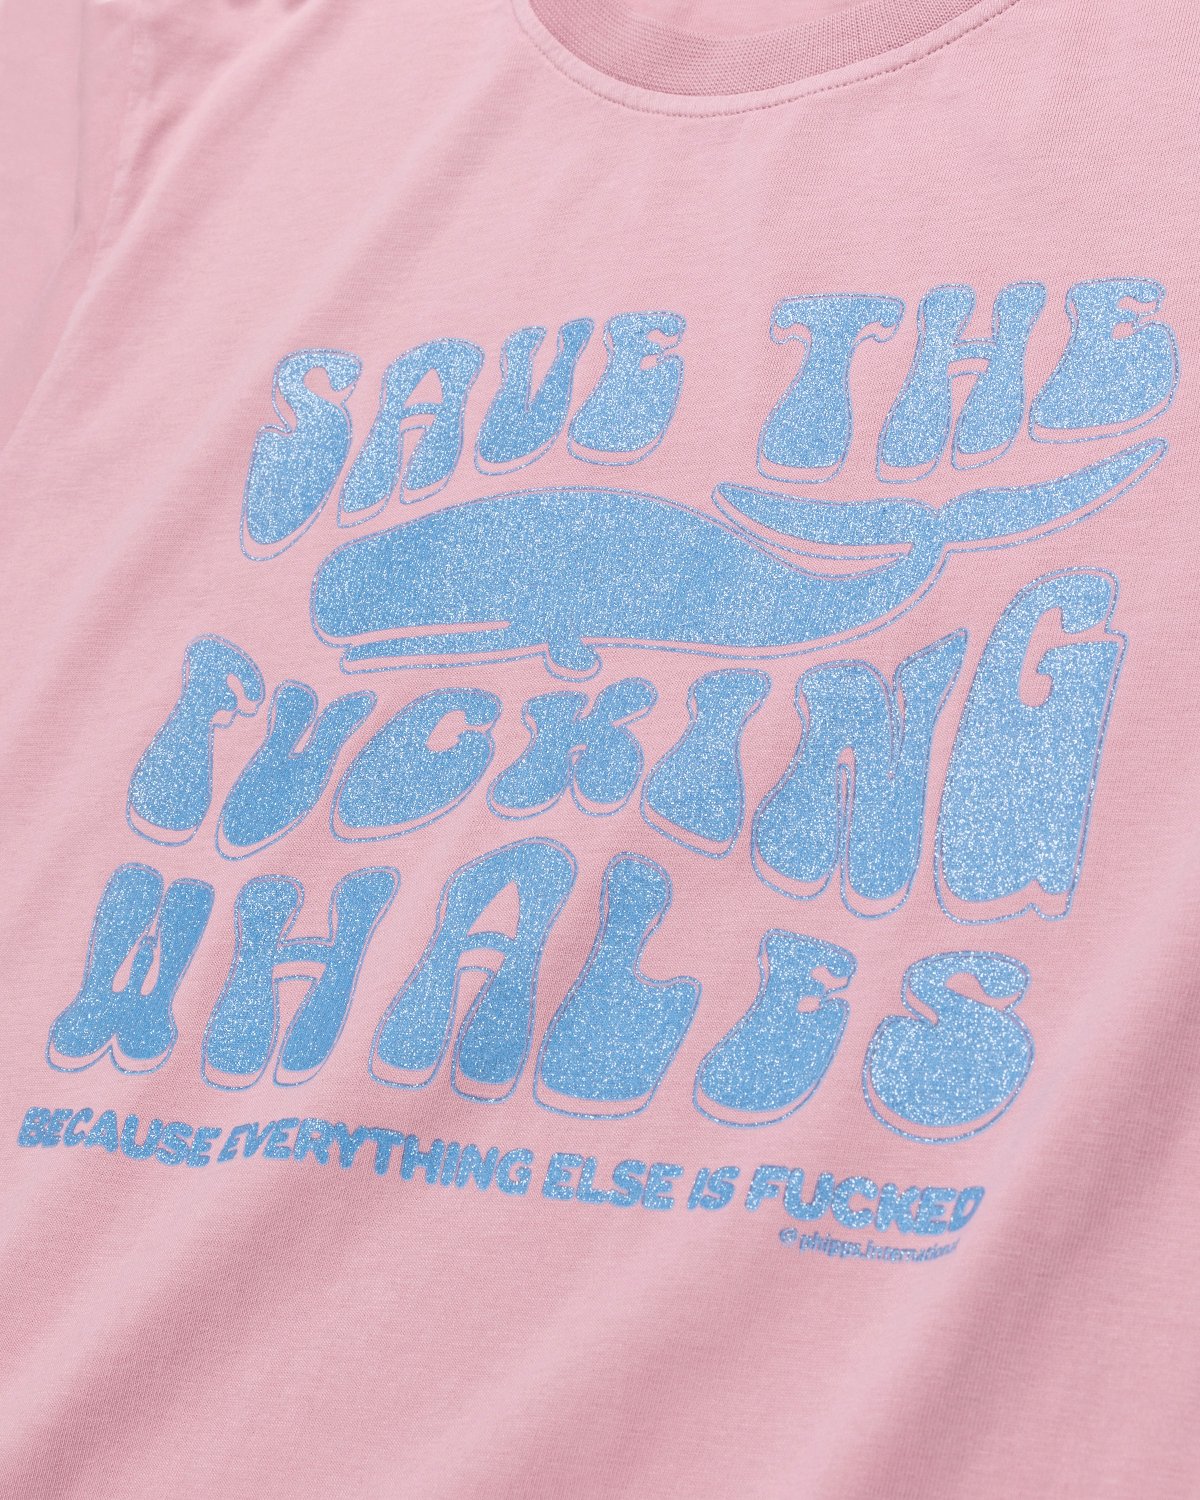 Phipps - Save The Fucking Whales T-Shirt Pink - Clothing - Pink - Image 4